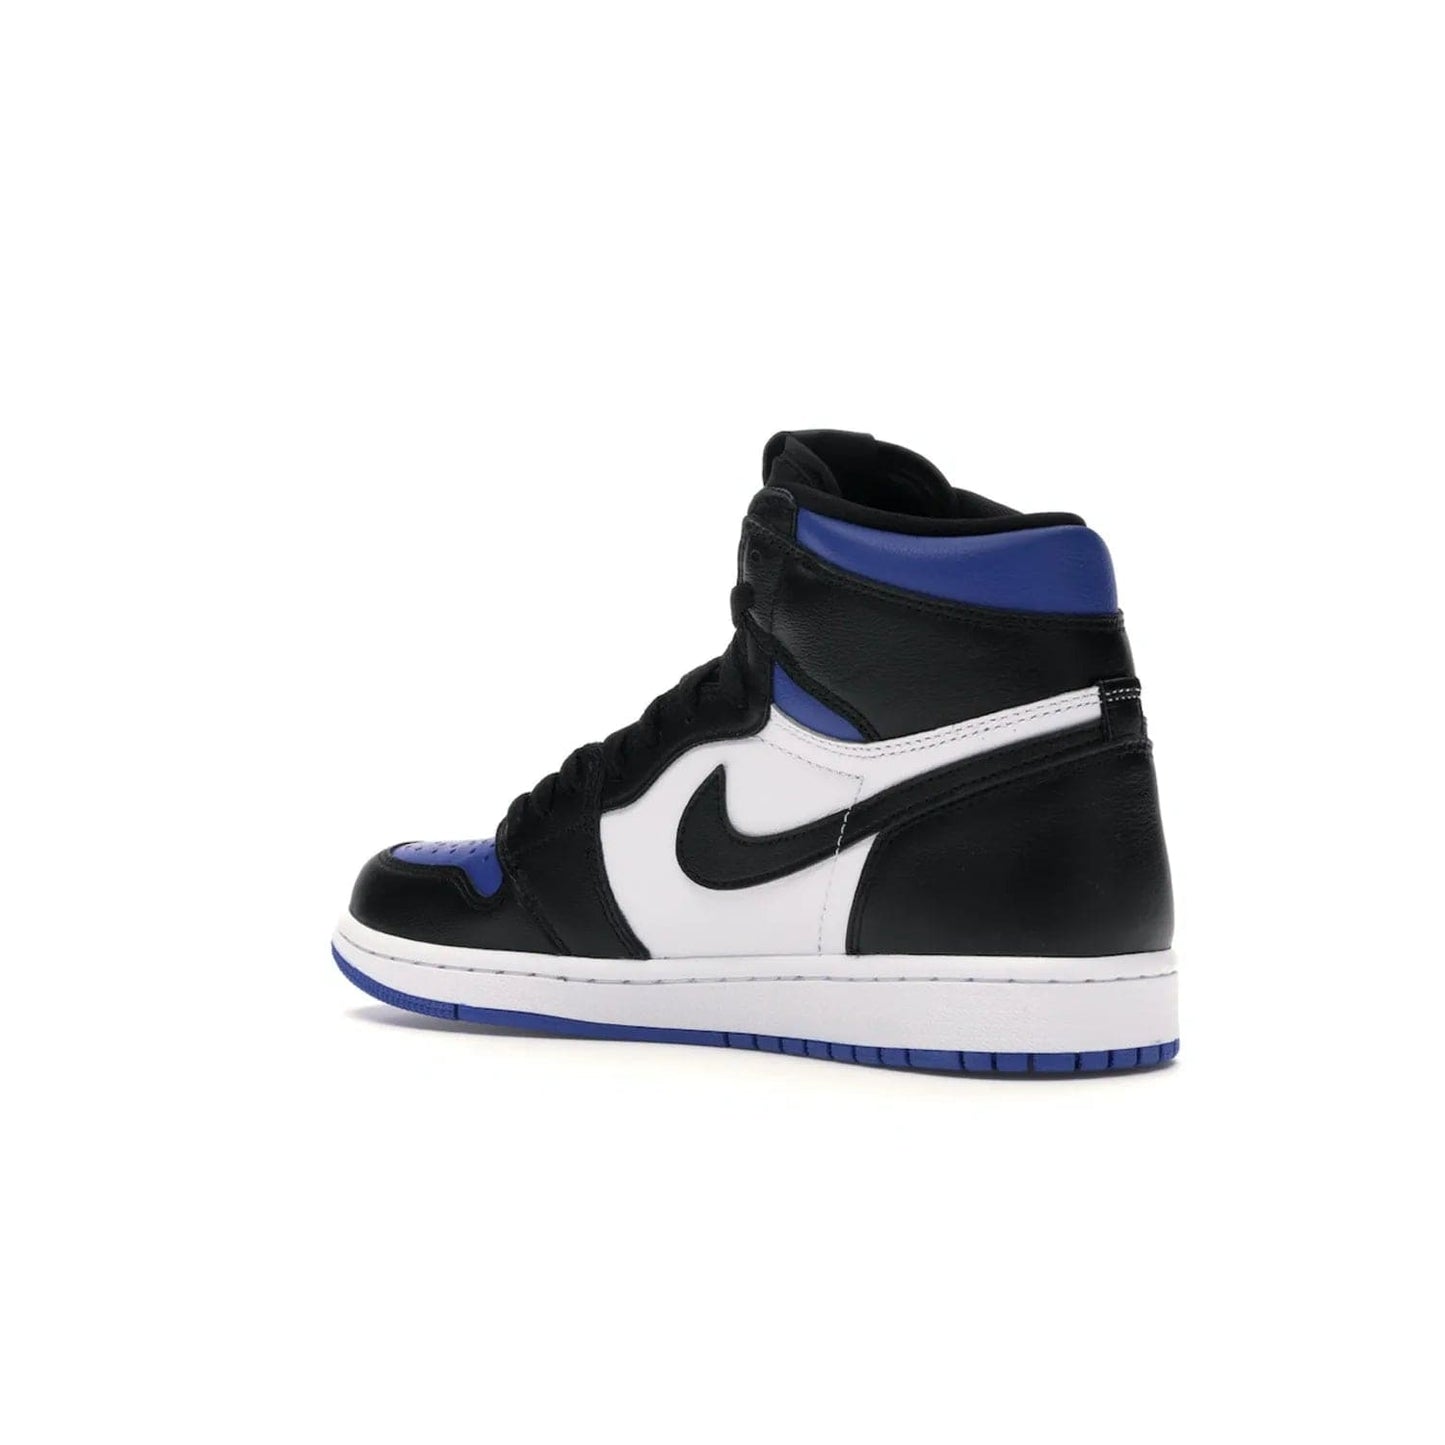 Jordan 1 Retro High Royal Toe - Image 23 - Only at www.BallersClubKickz.com - Refresh your look with the Jordan 1 Retro High Royal Toe. This classic AJ 1 sports a white and royal leather upper, black leather overlays, and branded leather tongue tag. Pick up today and set the streets ablaze.